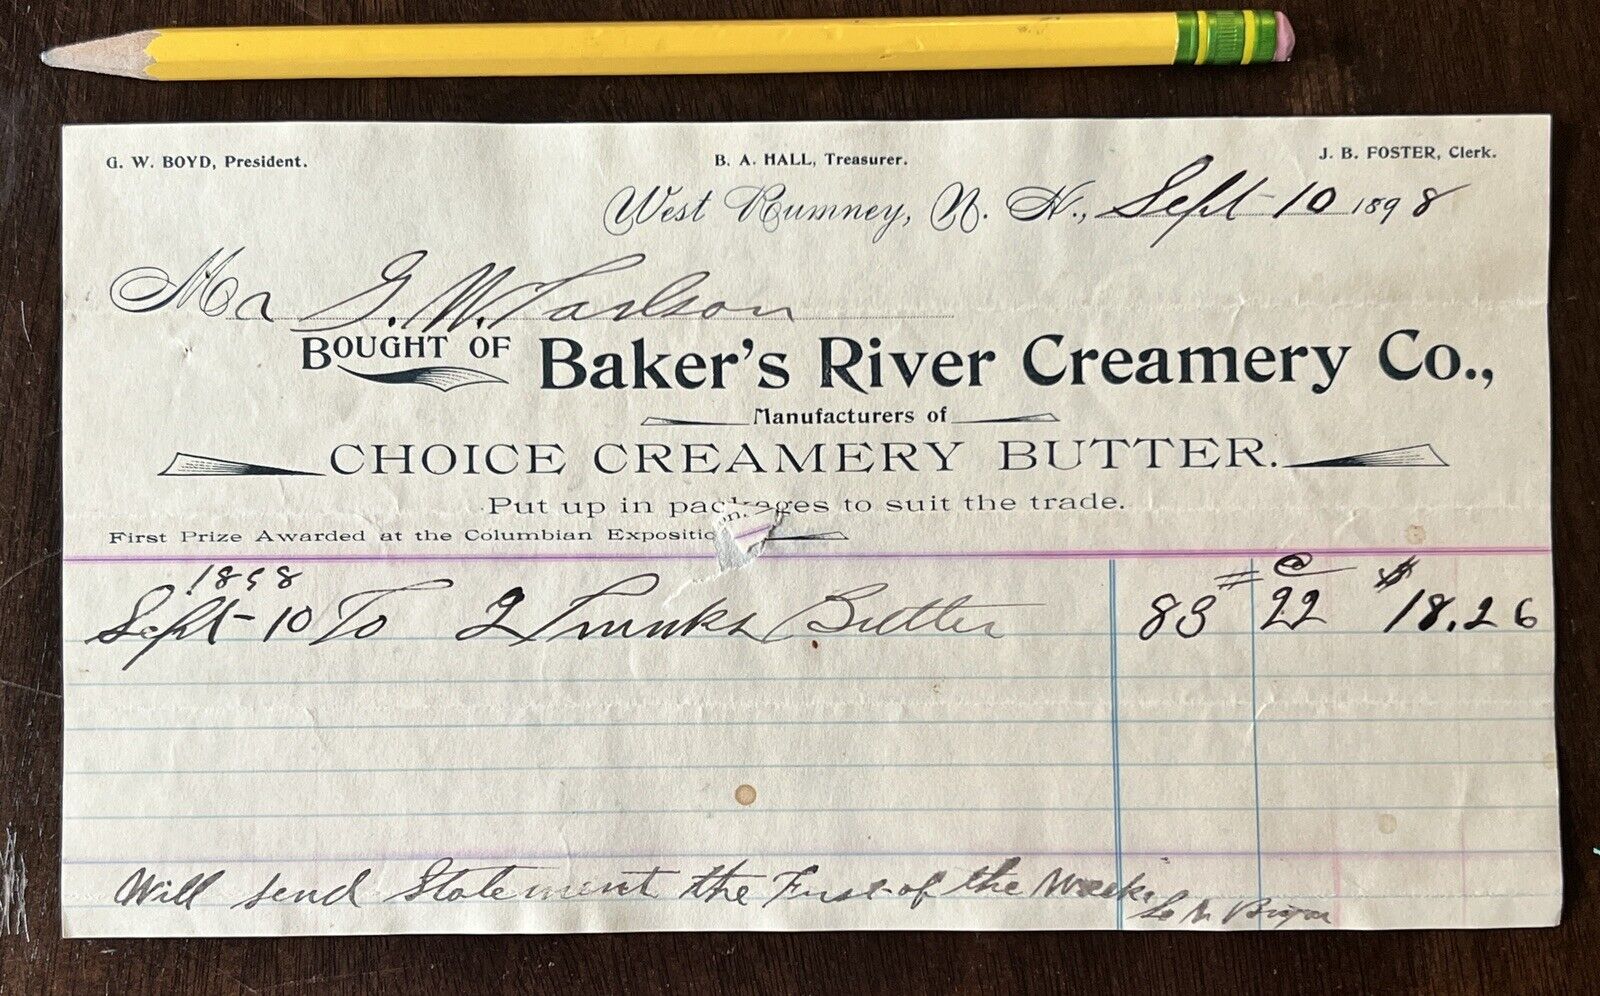 1898 WEST RUMNEY NH NEW HAMPSHIRE BAKER'S RIVER CREAMERY CO. INVOICE RECEIPT